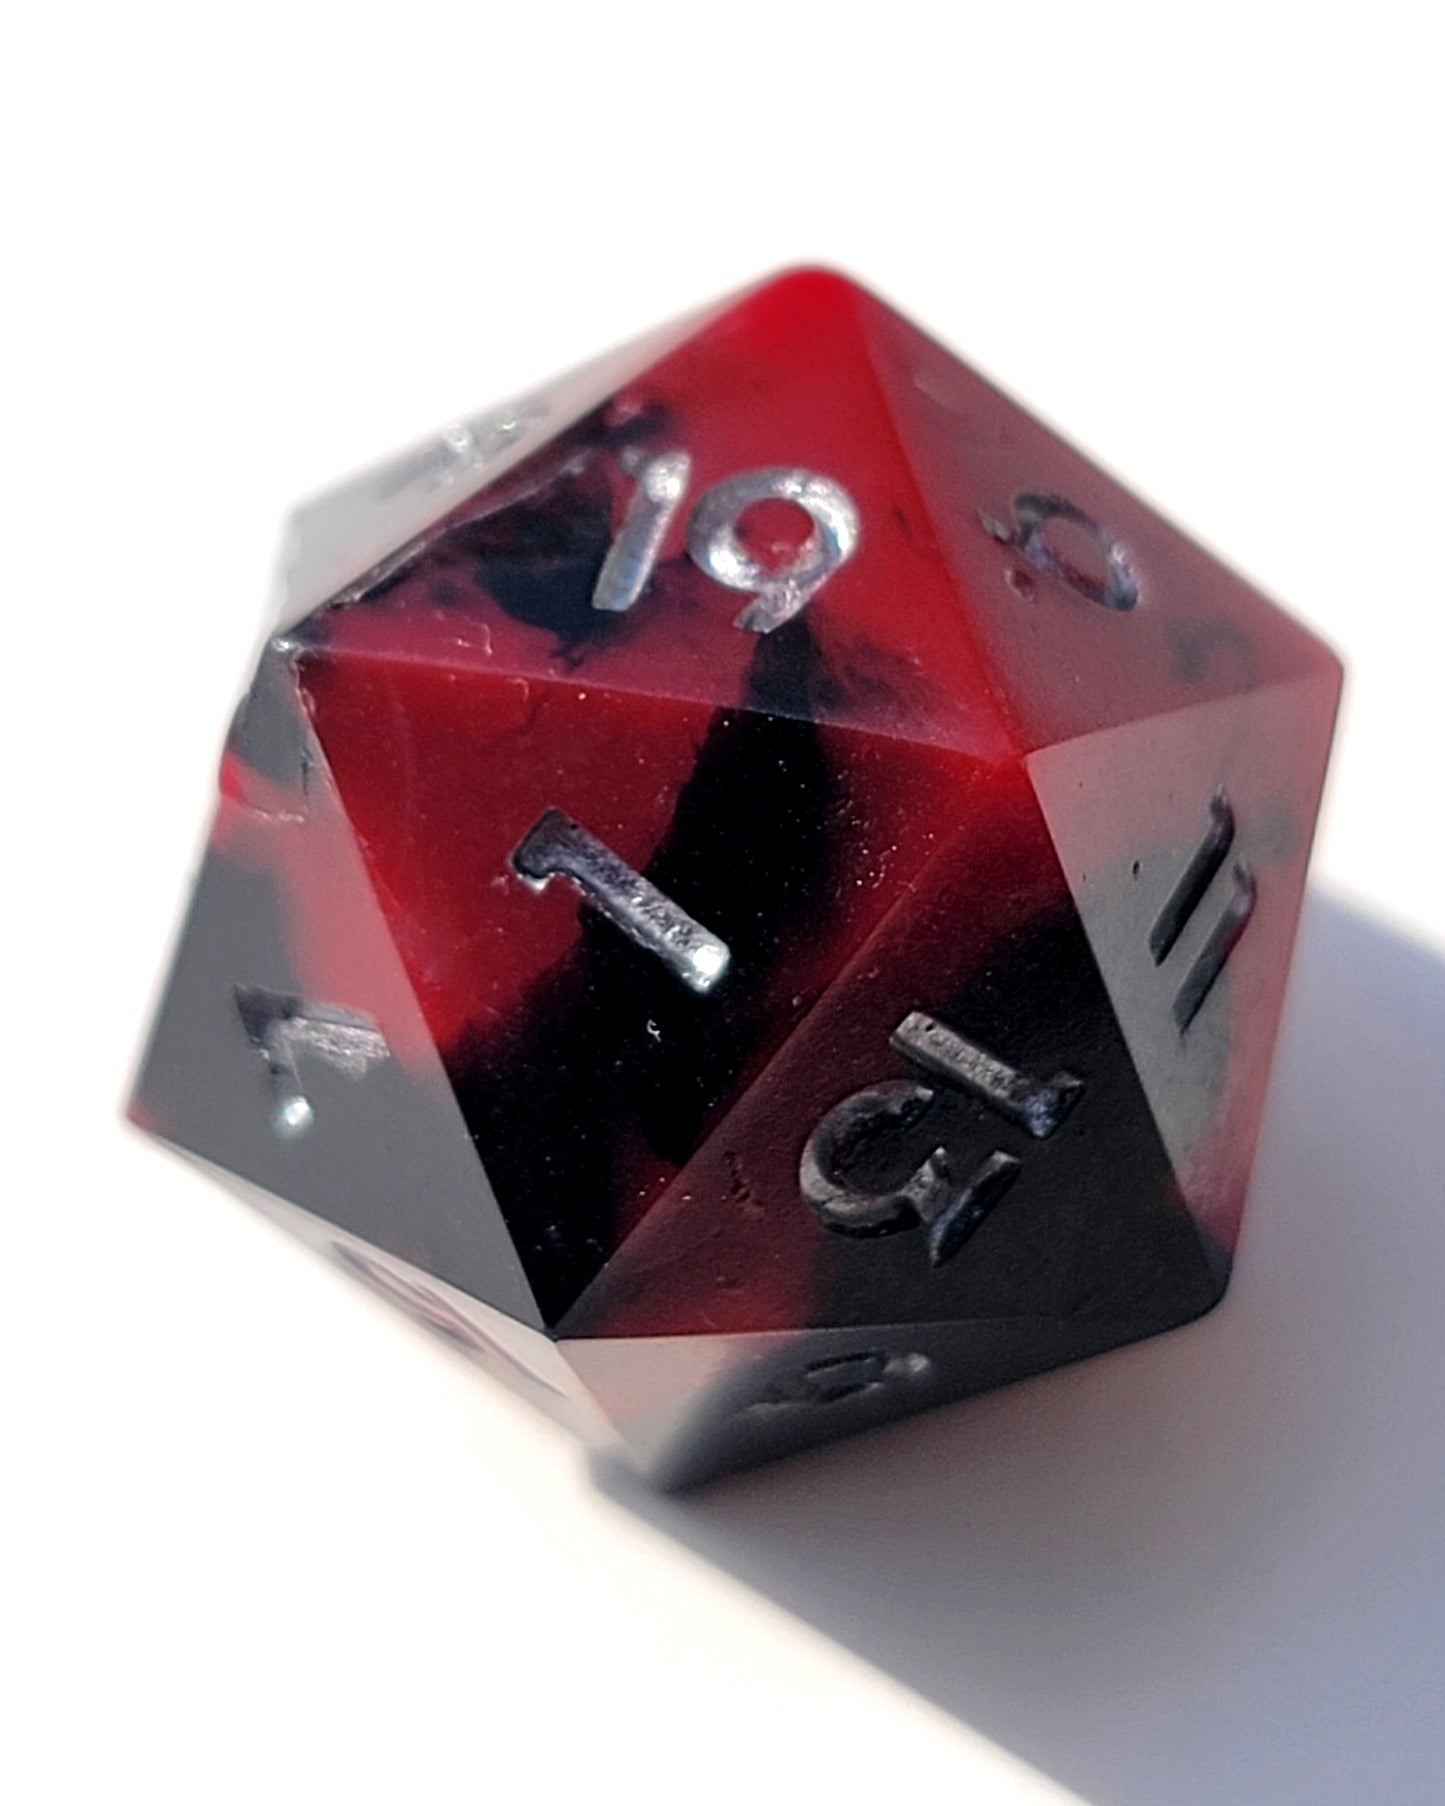 Unquenchable Pride - D20s | Handmade dice | Hand crafted DnD Dice